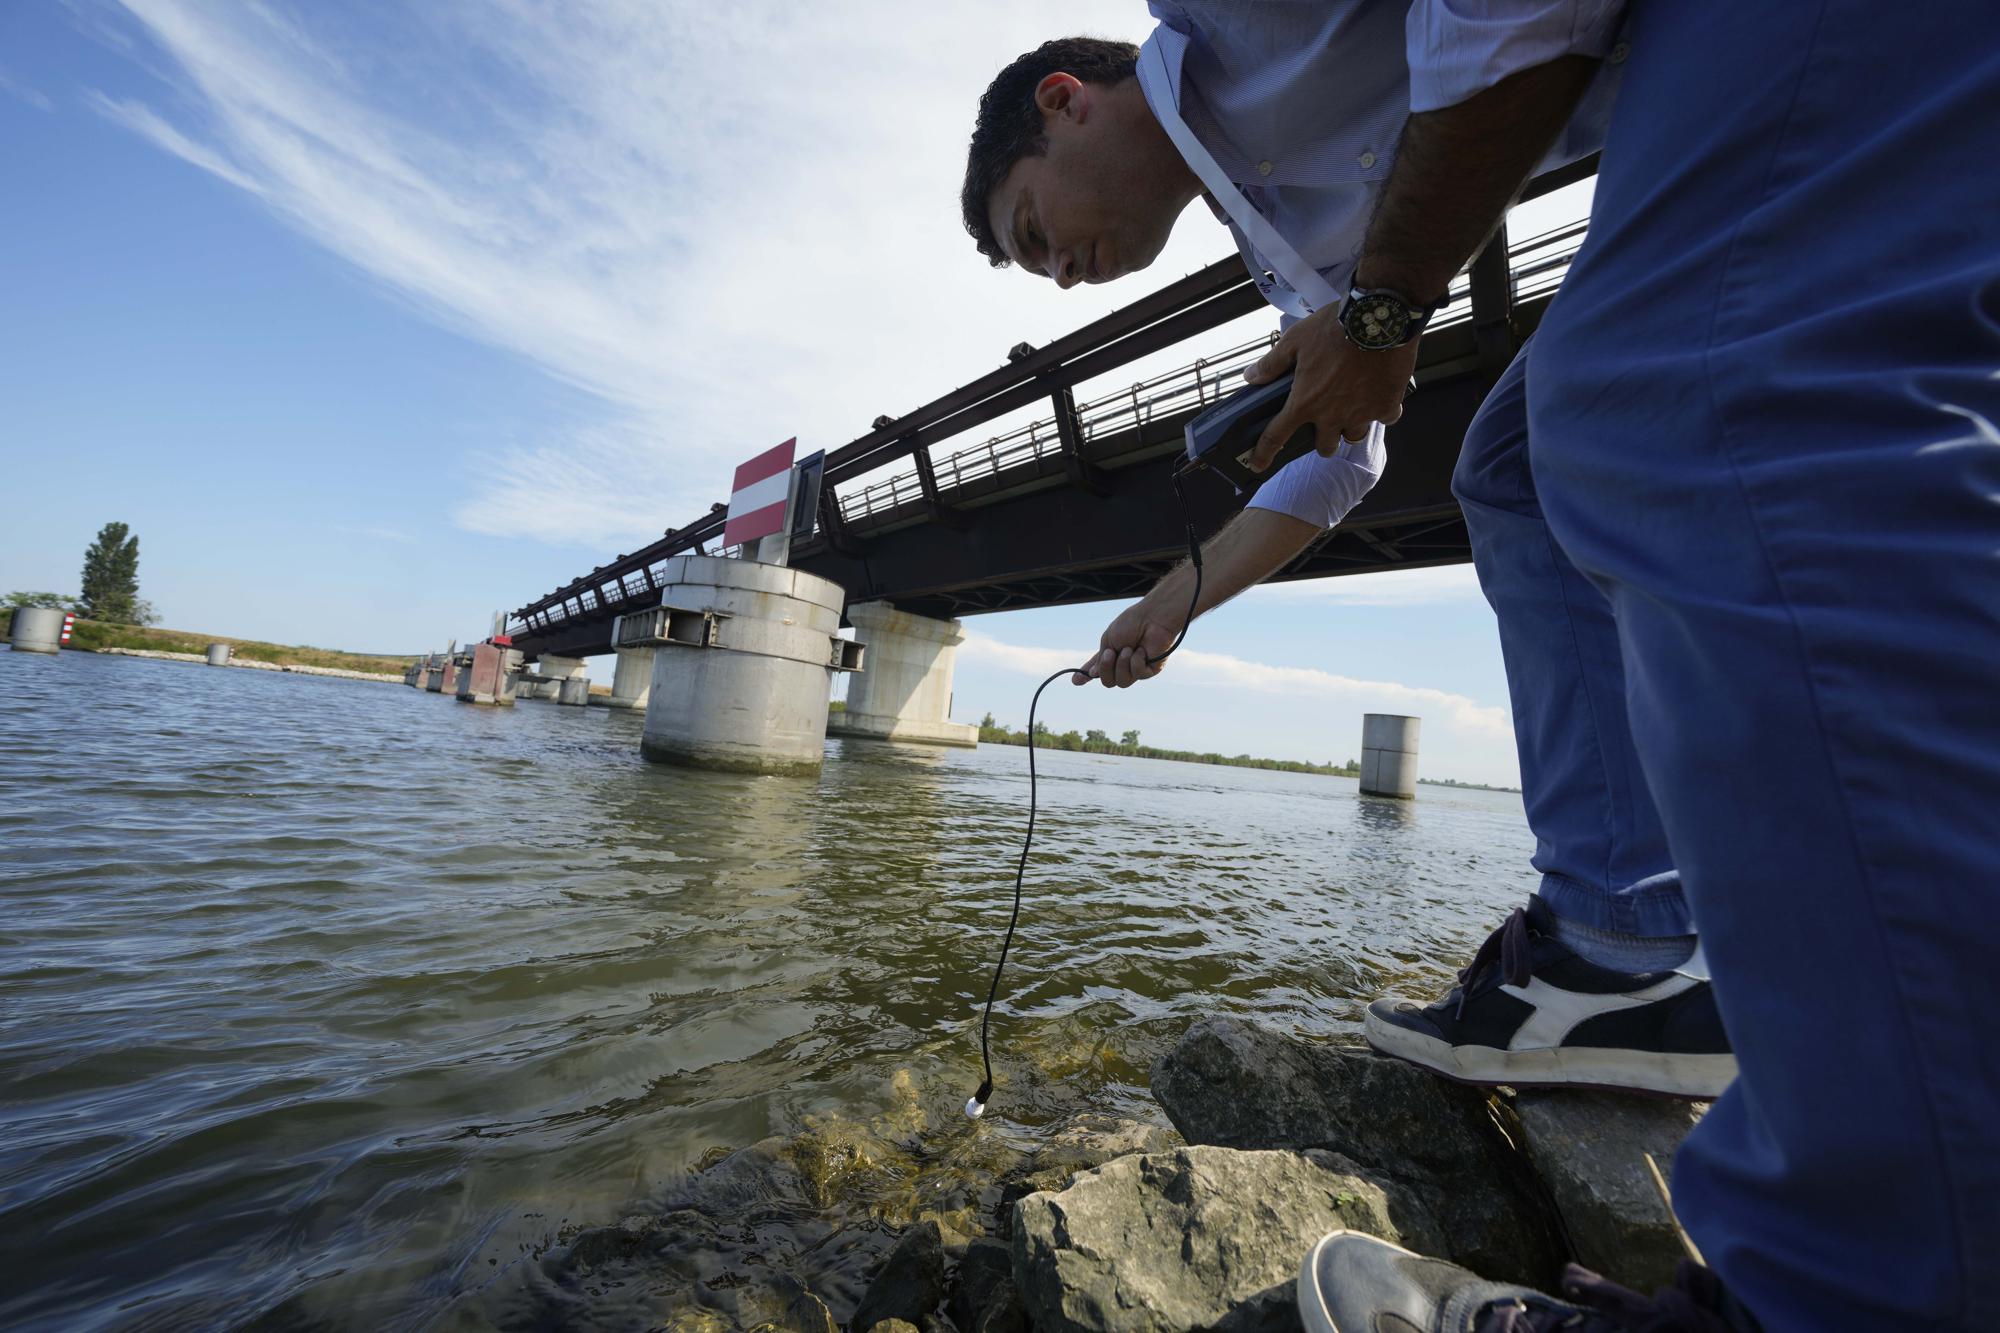 Rodolfo Laurenti, Deputy Director of the Remediation Consortium of the Po River, checks the salinity of the river, at a desalination barrier in Porto Tolle, Italy, on the Delta river, Friday, July 29, 2022. The amount of water entering the delta from the Po River is at an all-time low. (AP Photo/Luca Bruno)